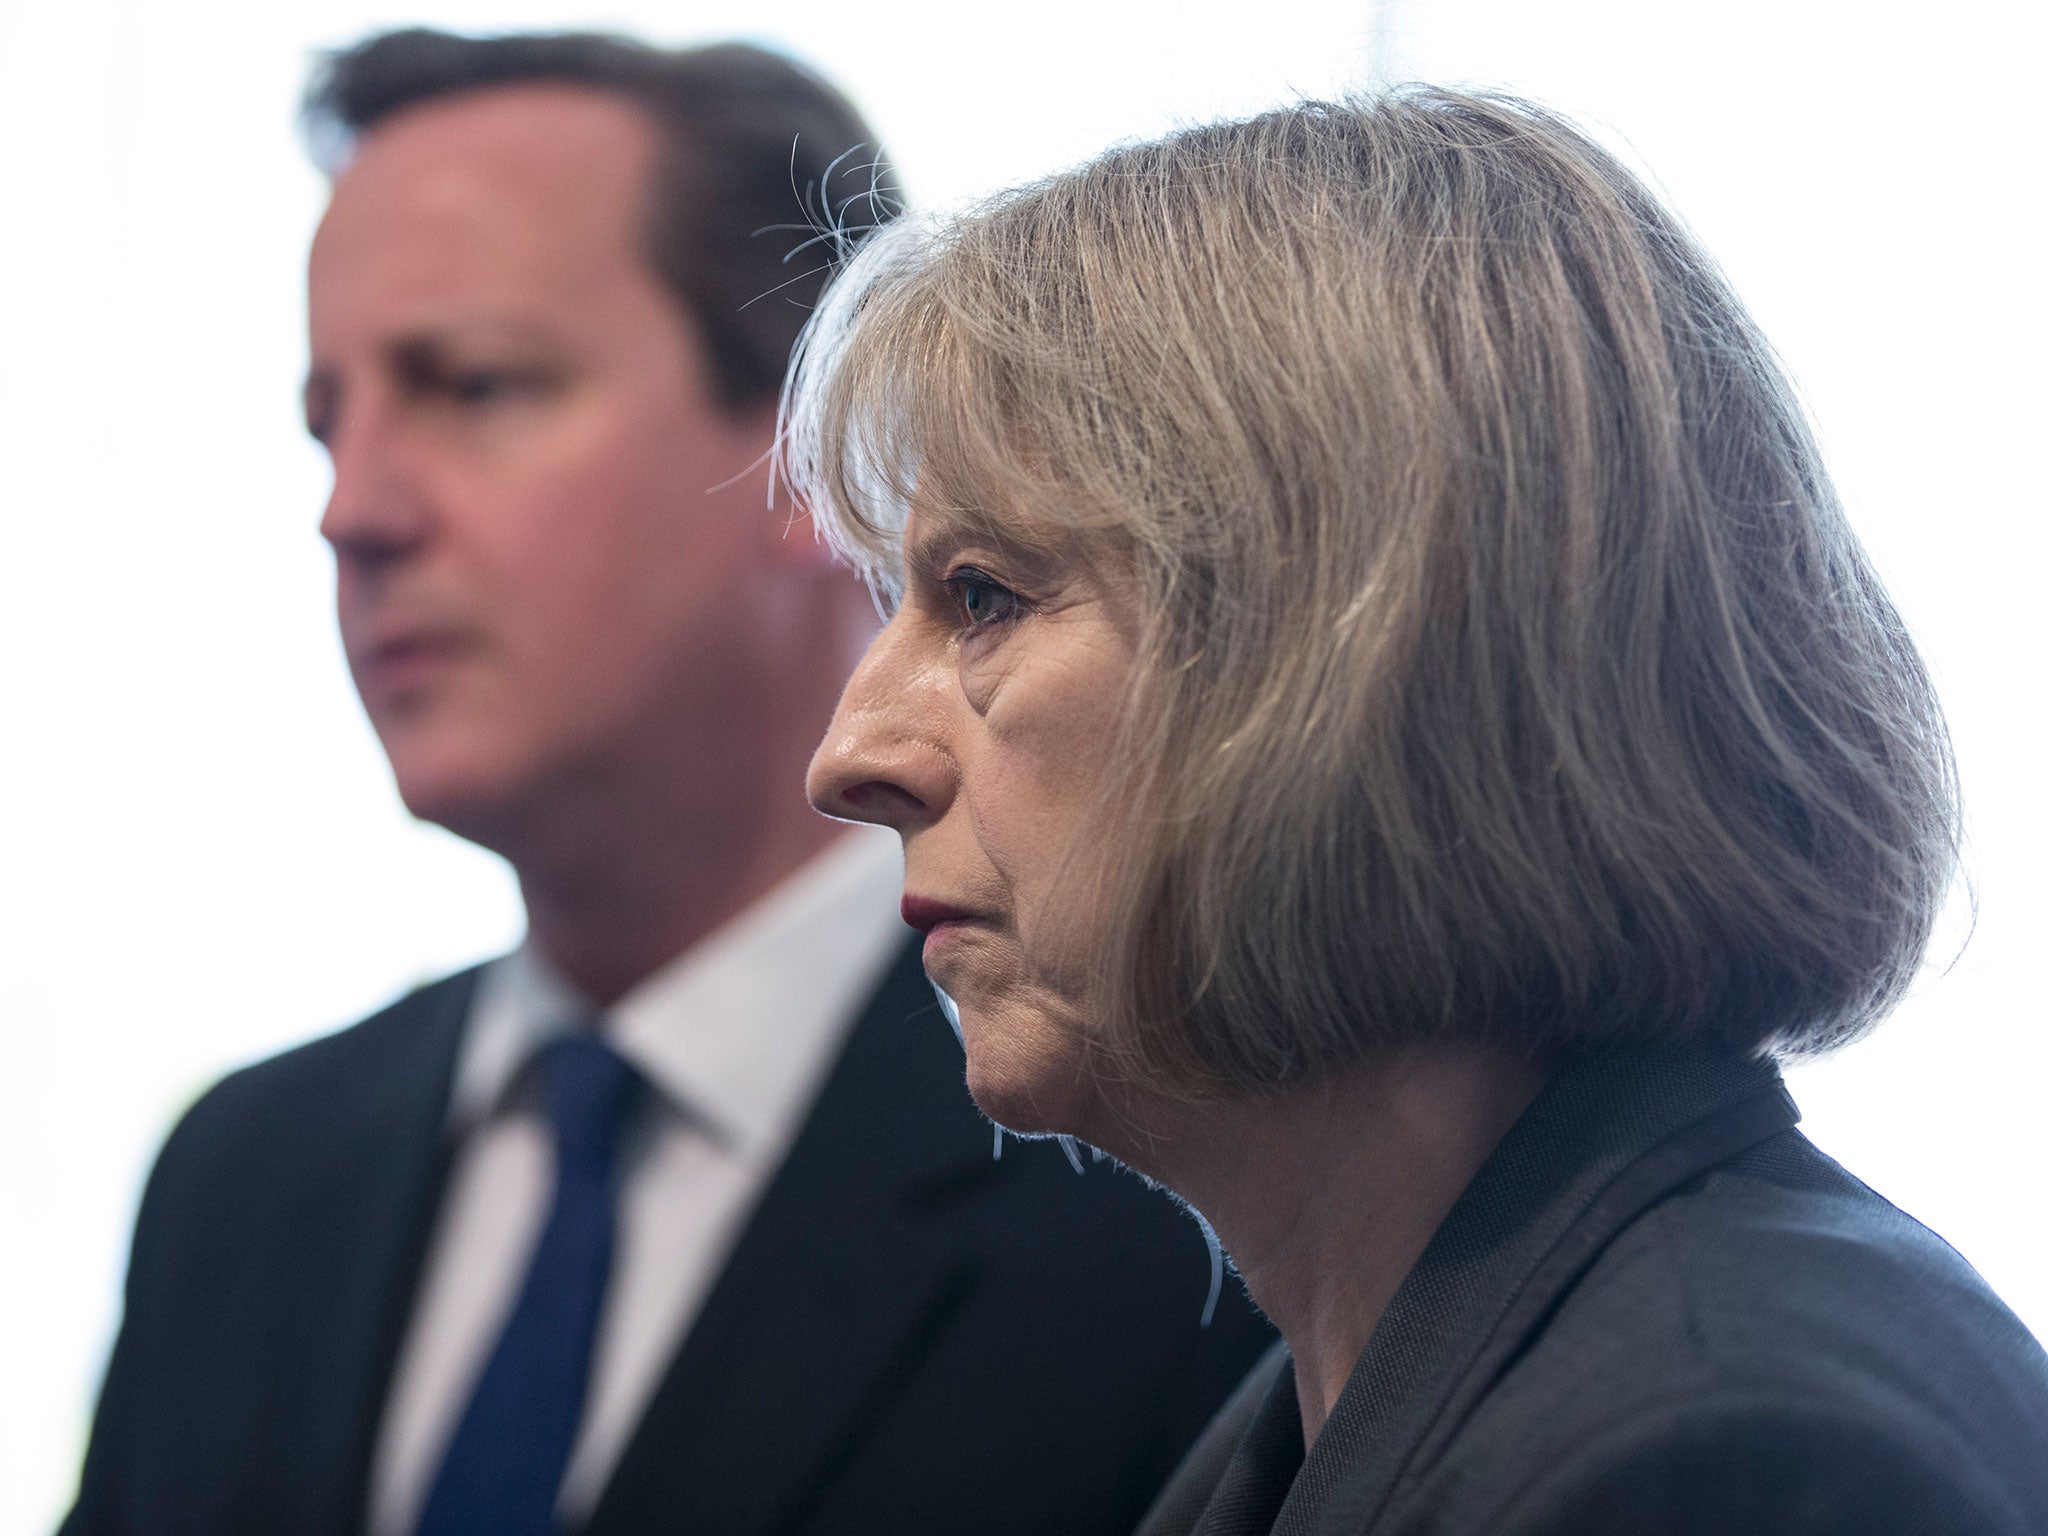 David Cameron and Theresa May came under scathing attack from across the political spectrum tonight, after reneging on a promise to give MPs a vote on a contentious European issue